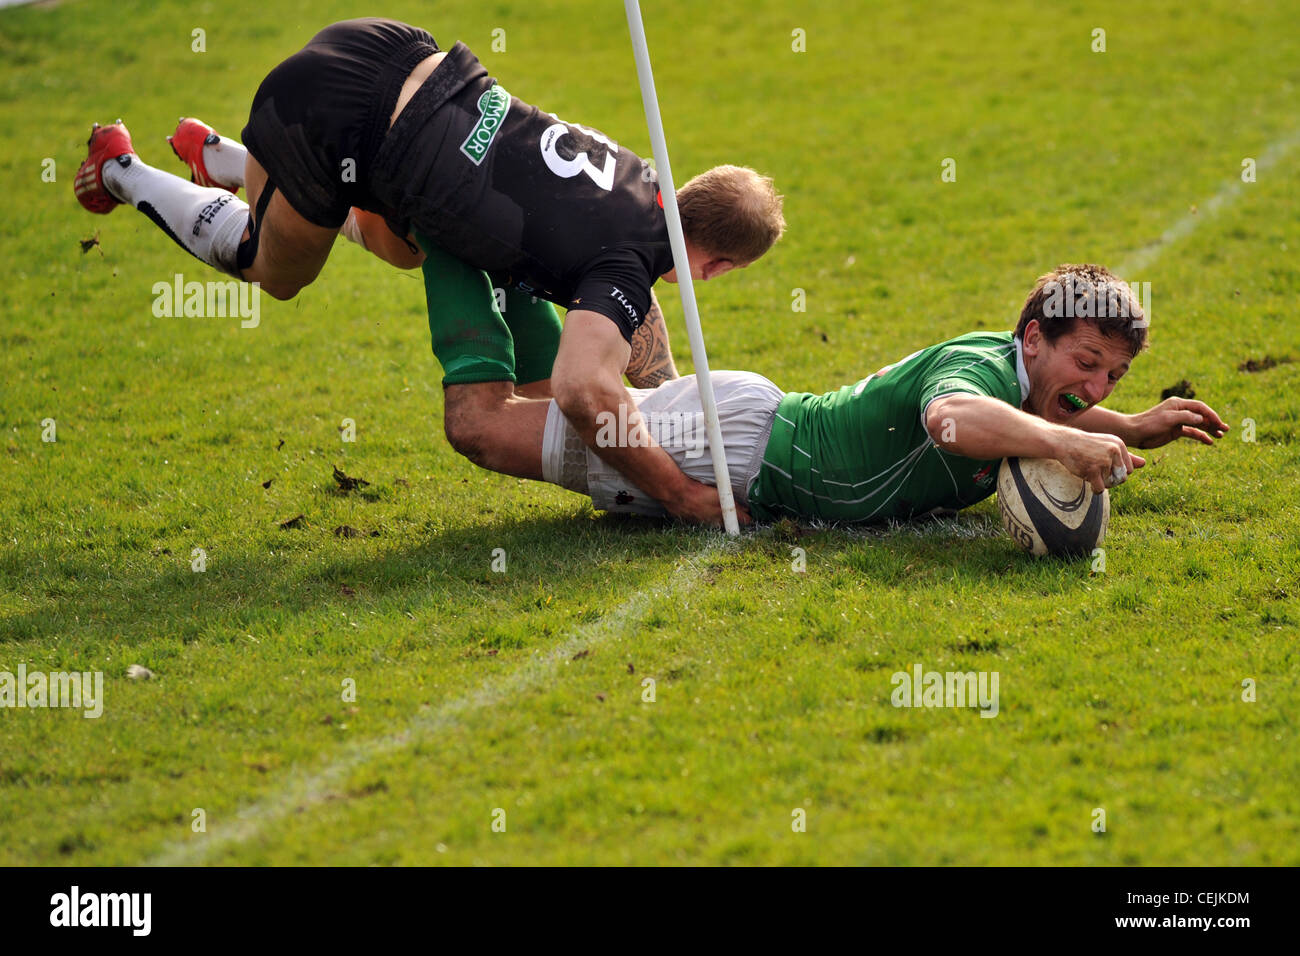 Rugby game, Wharfedale Rugby Union Football Club, North Yorkshire UK Stock Photo